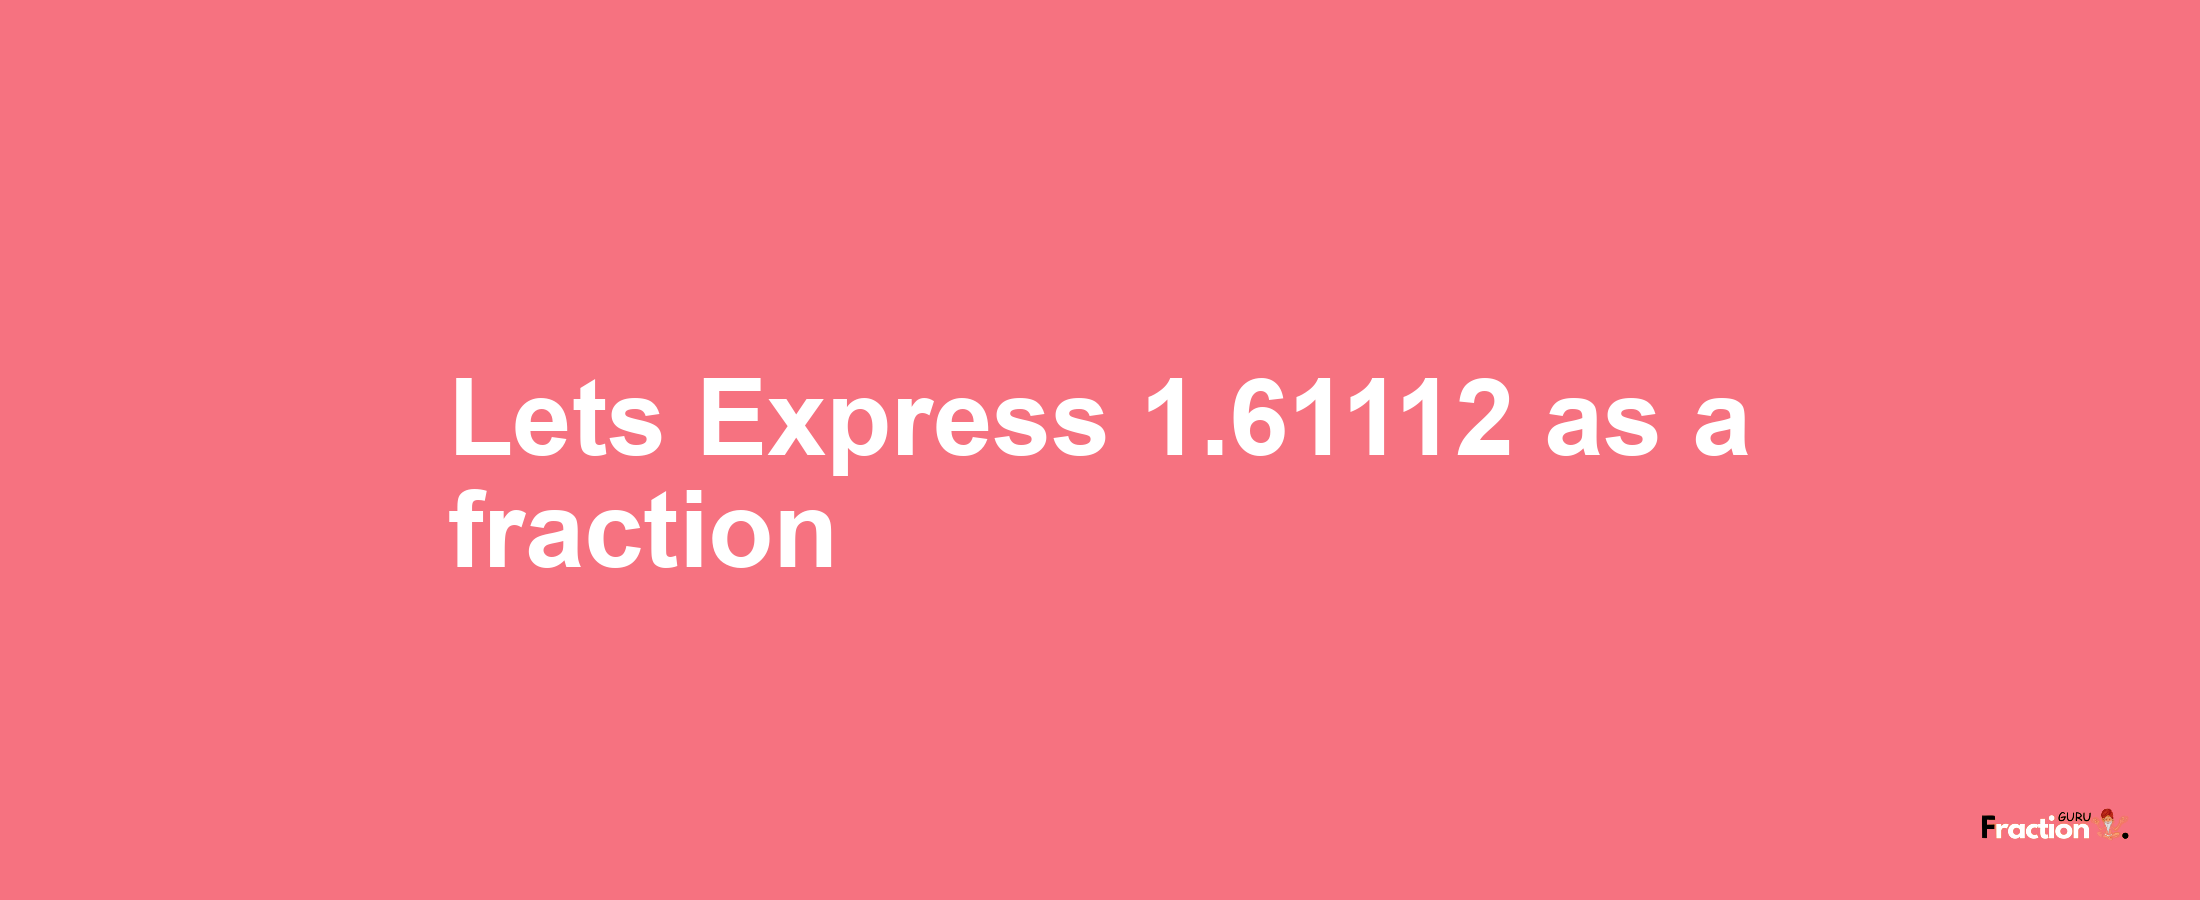 Lets Express 1.61112 as afraction